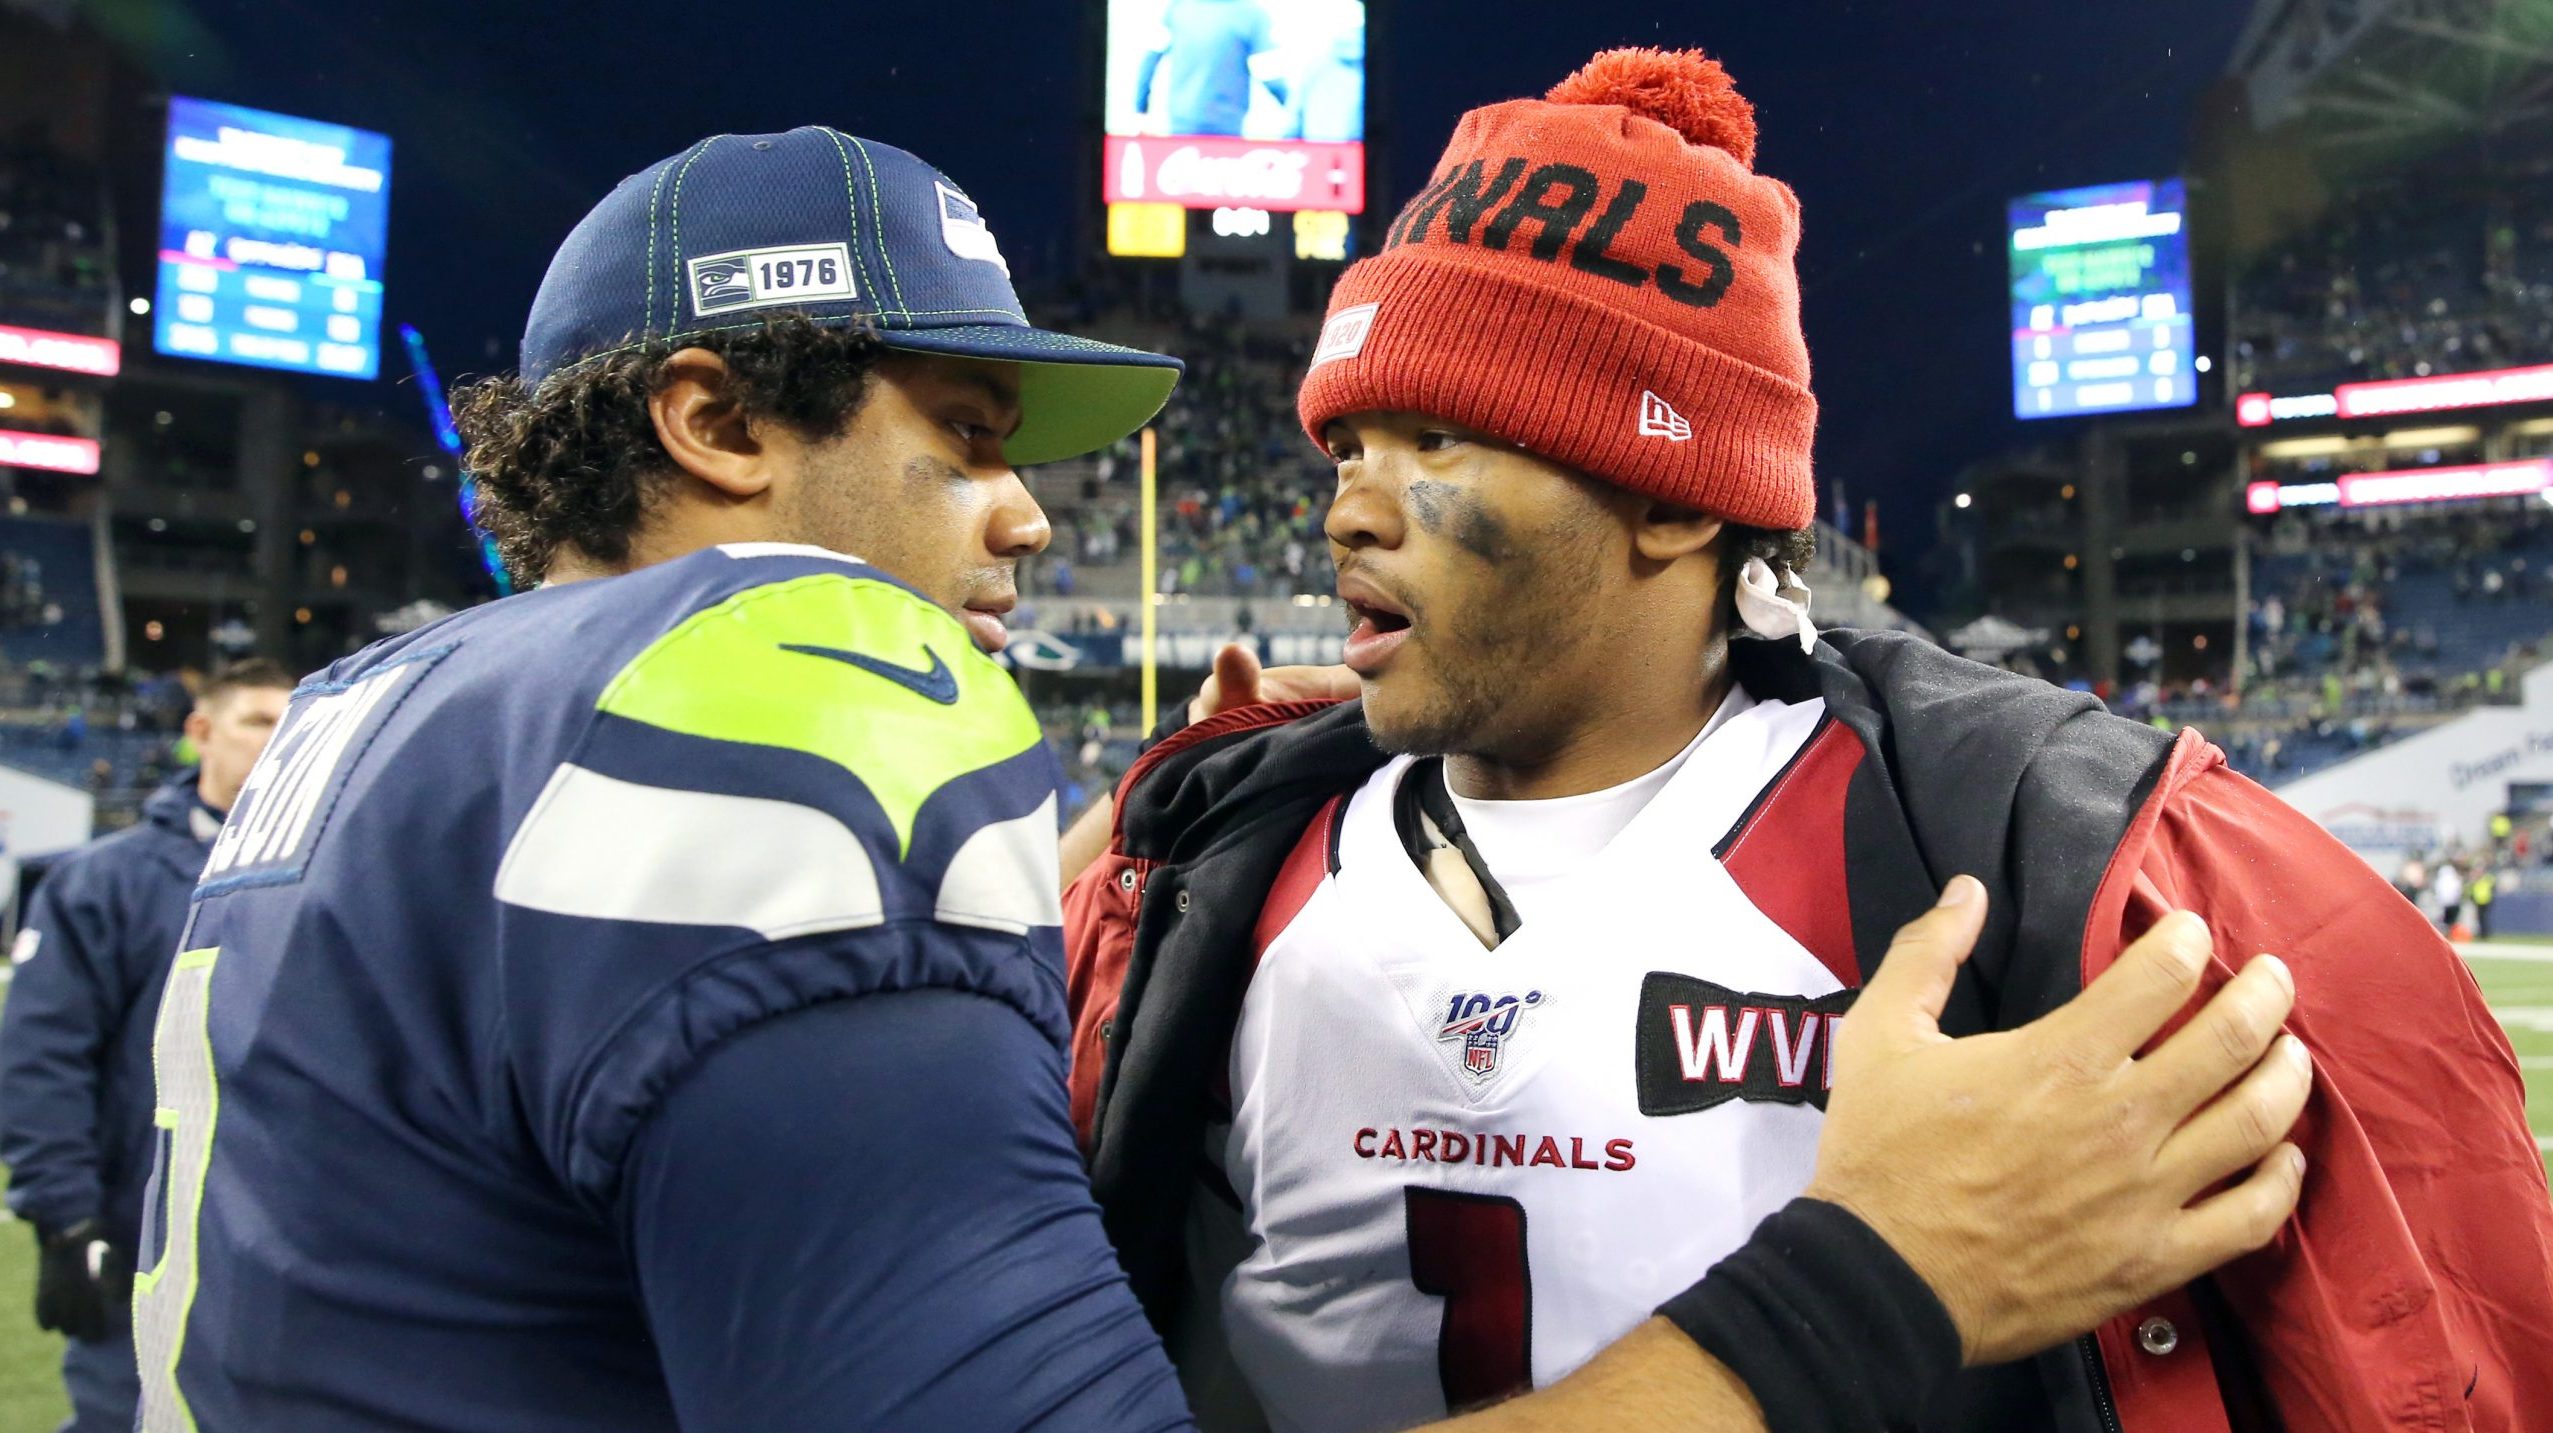 Seahawks trading Russell Wilson to Broncos has Cardinals fans rejoicing